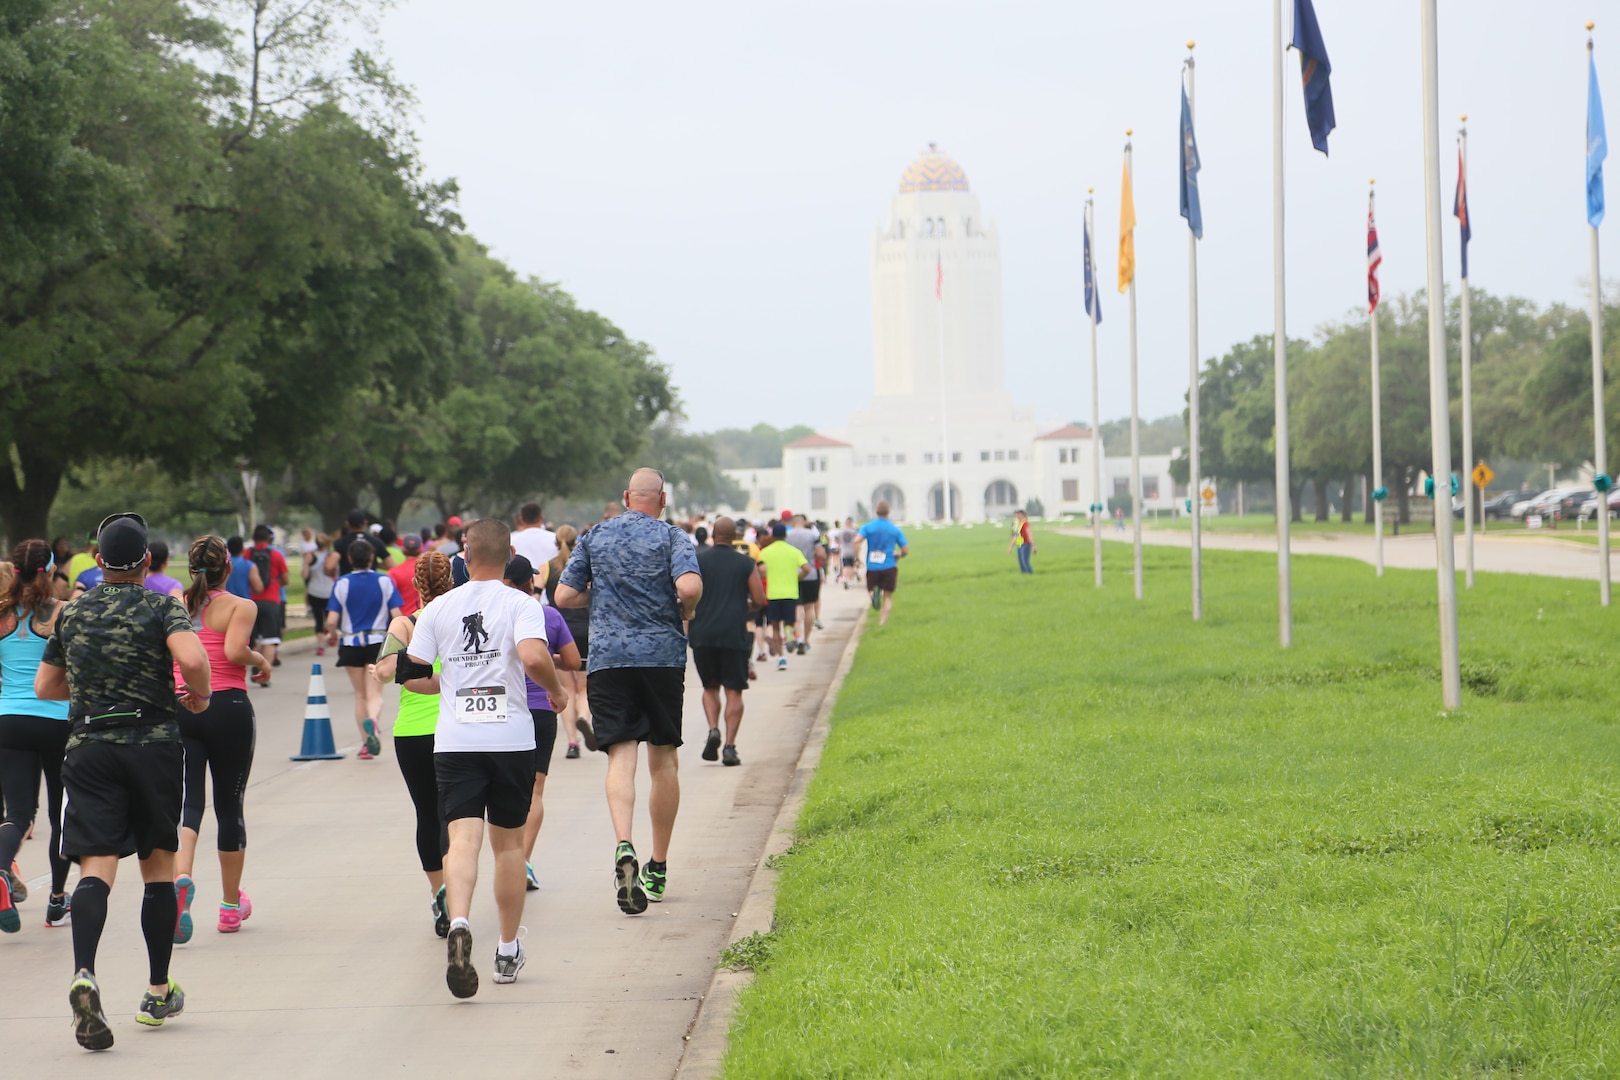 Joint Base San Antonio members run down Harmon Drive April 26 during the start of the JBSA Half Marathon at JBSA-Randolph. In its second year, the race not only provided an opportunity for members from all JBSA locations to tour the scenic route and rich history of JBSA-Randolph, but to experience camaraderie and teamwork between runners and volunteers alike throughout the event. (U.S. Air Force photo by Airman 1st Class Alexandria Slade)
